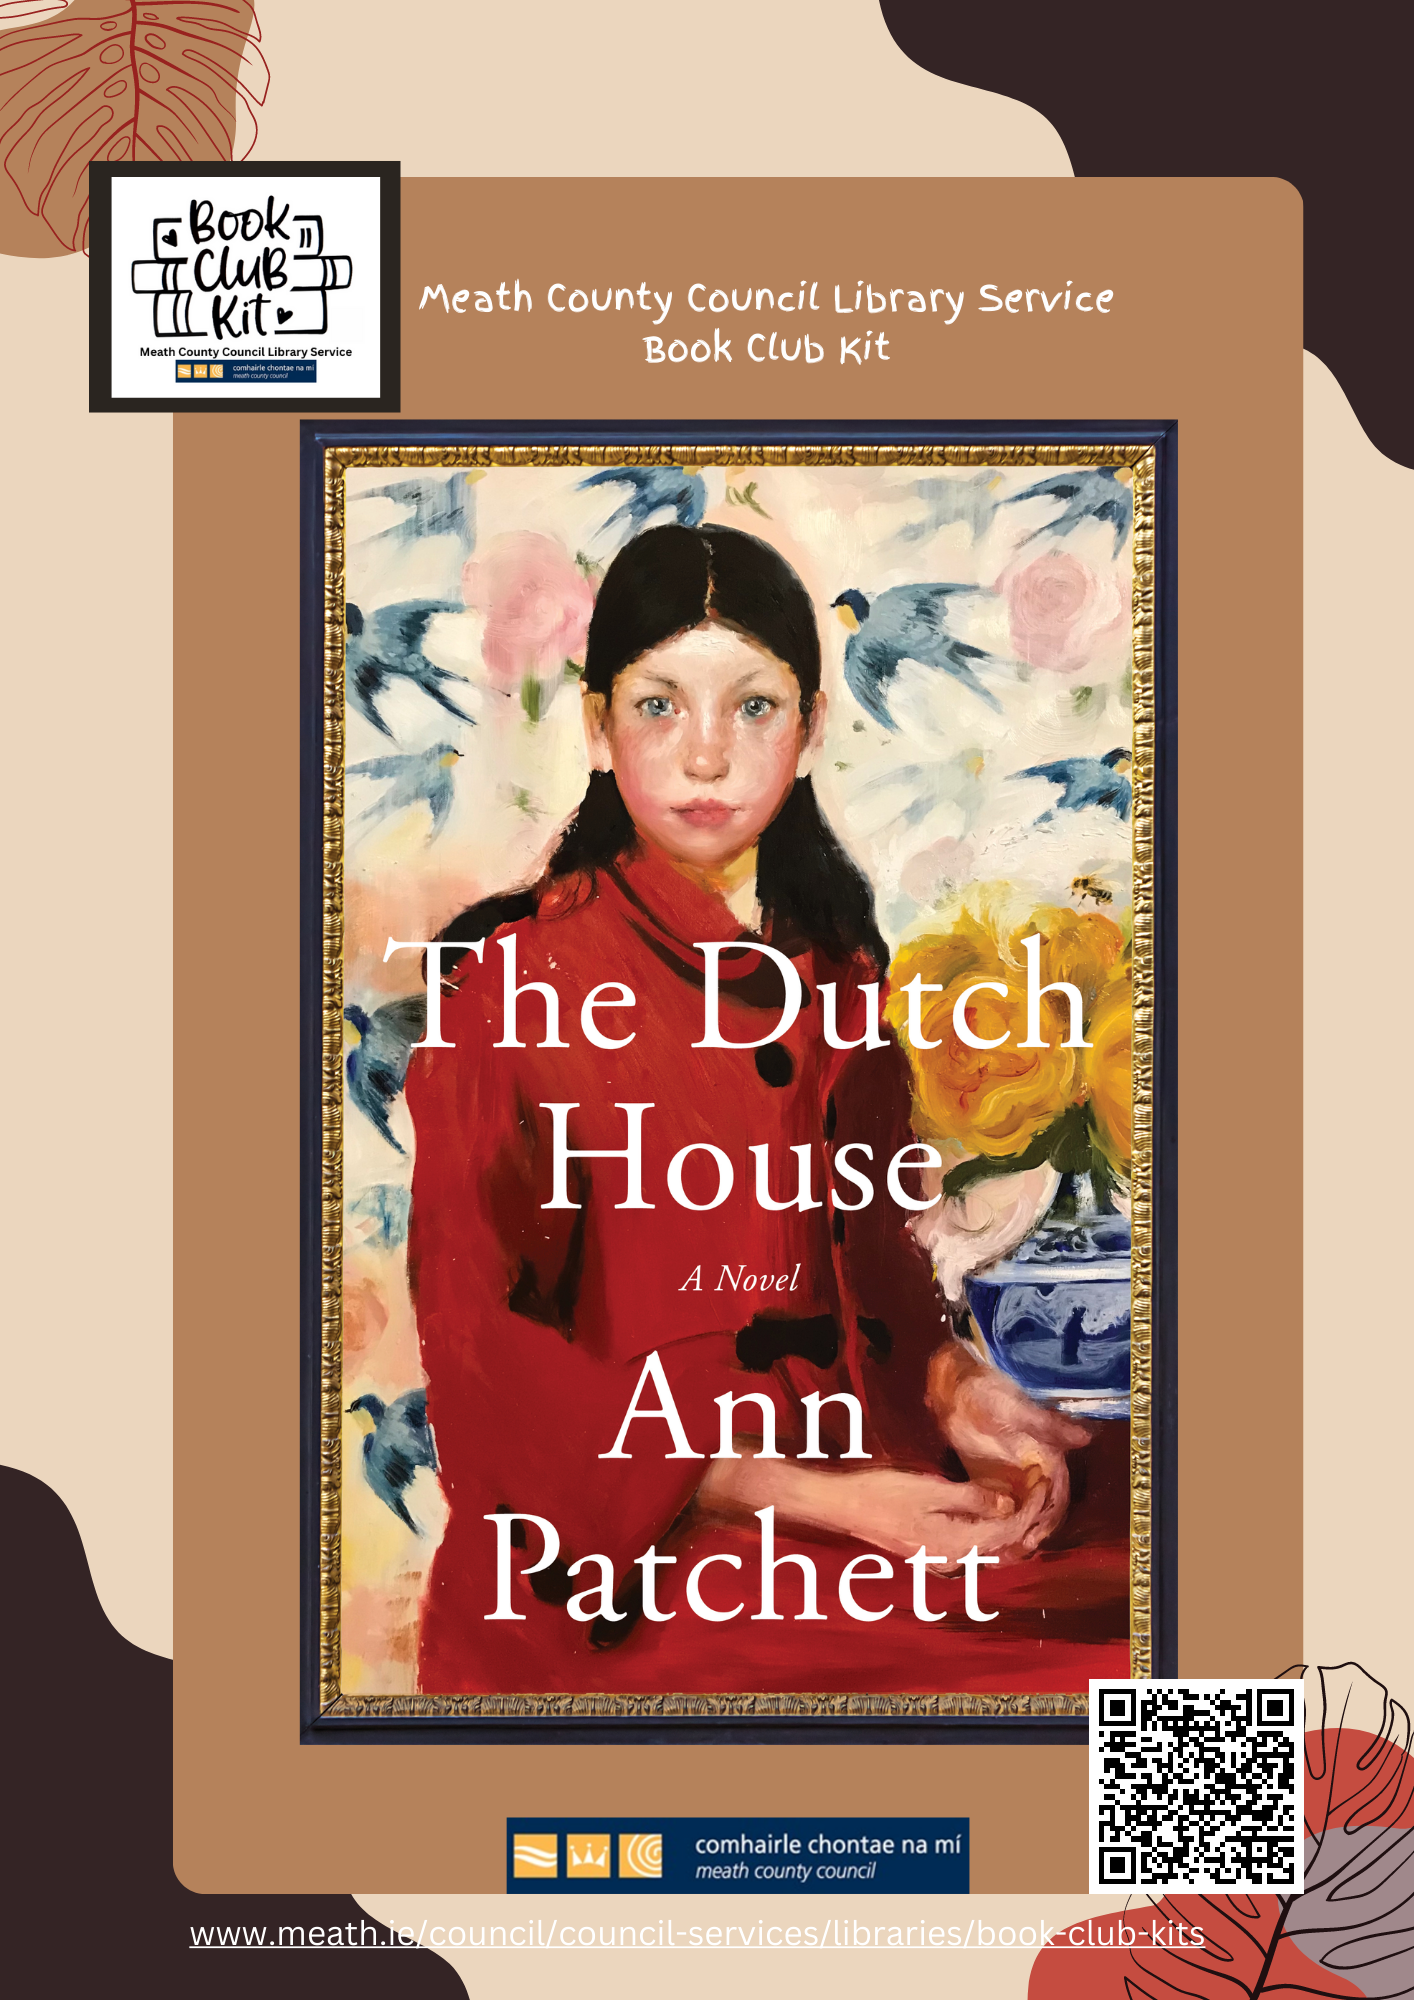 The Dutch House Book Club Kit Guide Image